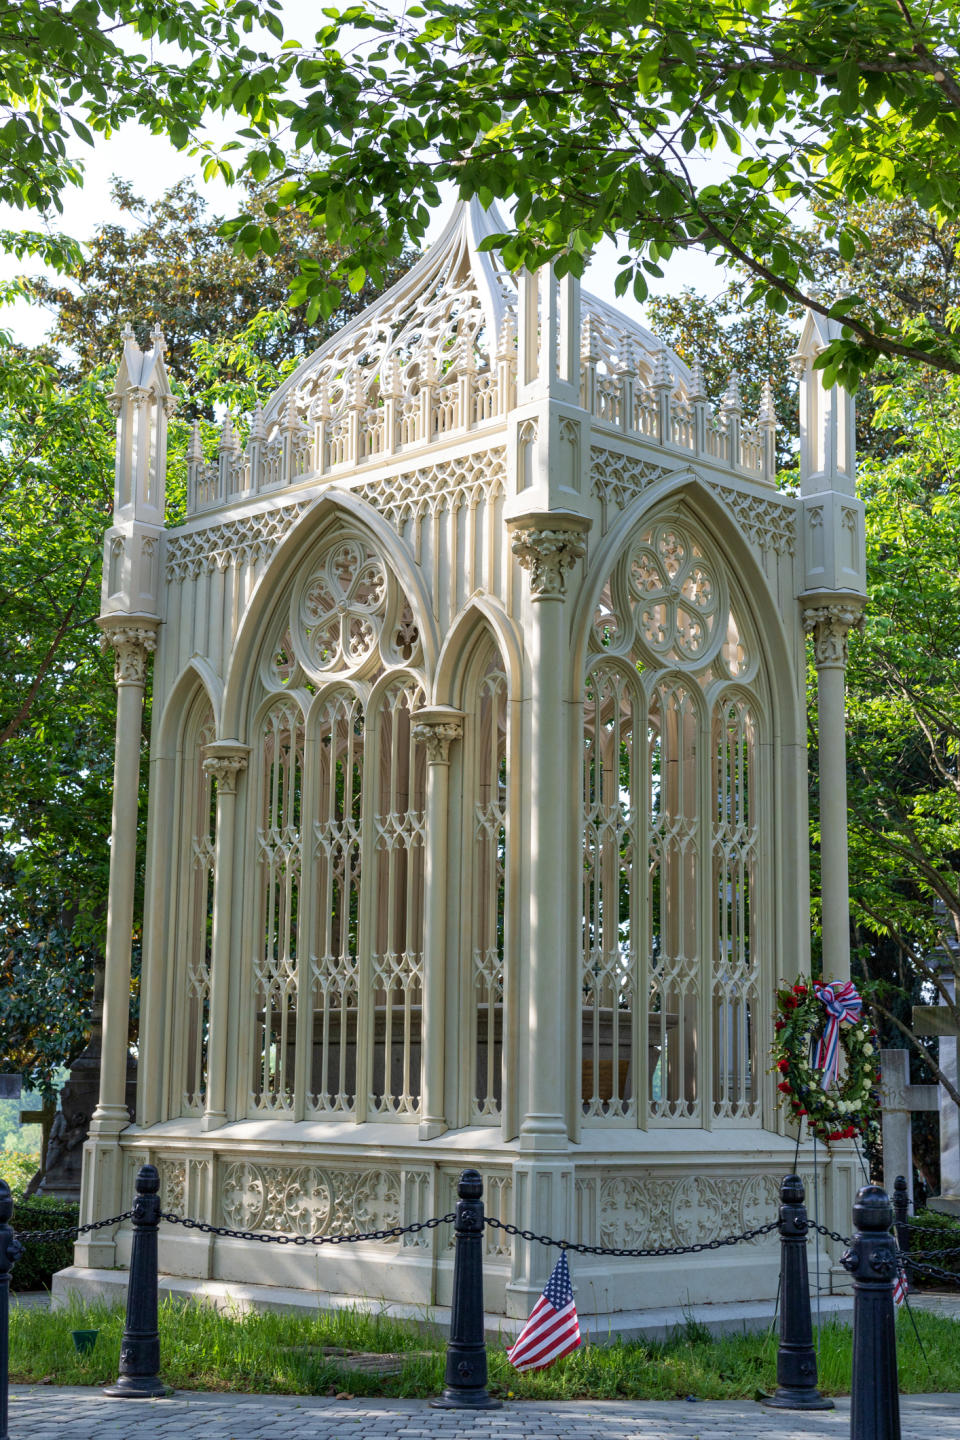 Gothic-style outdoor memorial structure with an American flag and wreath at its base